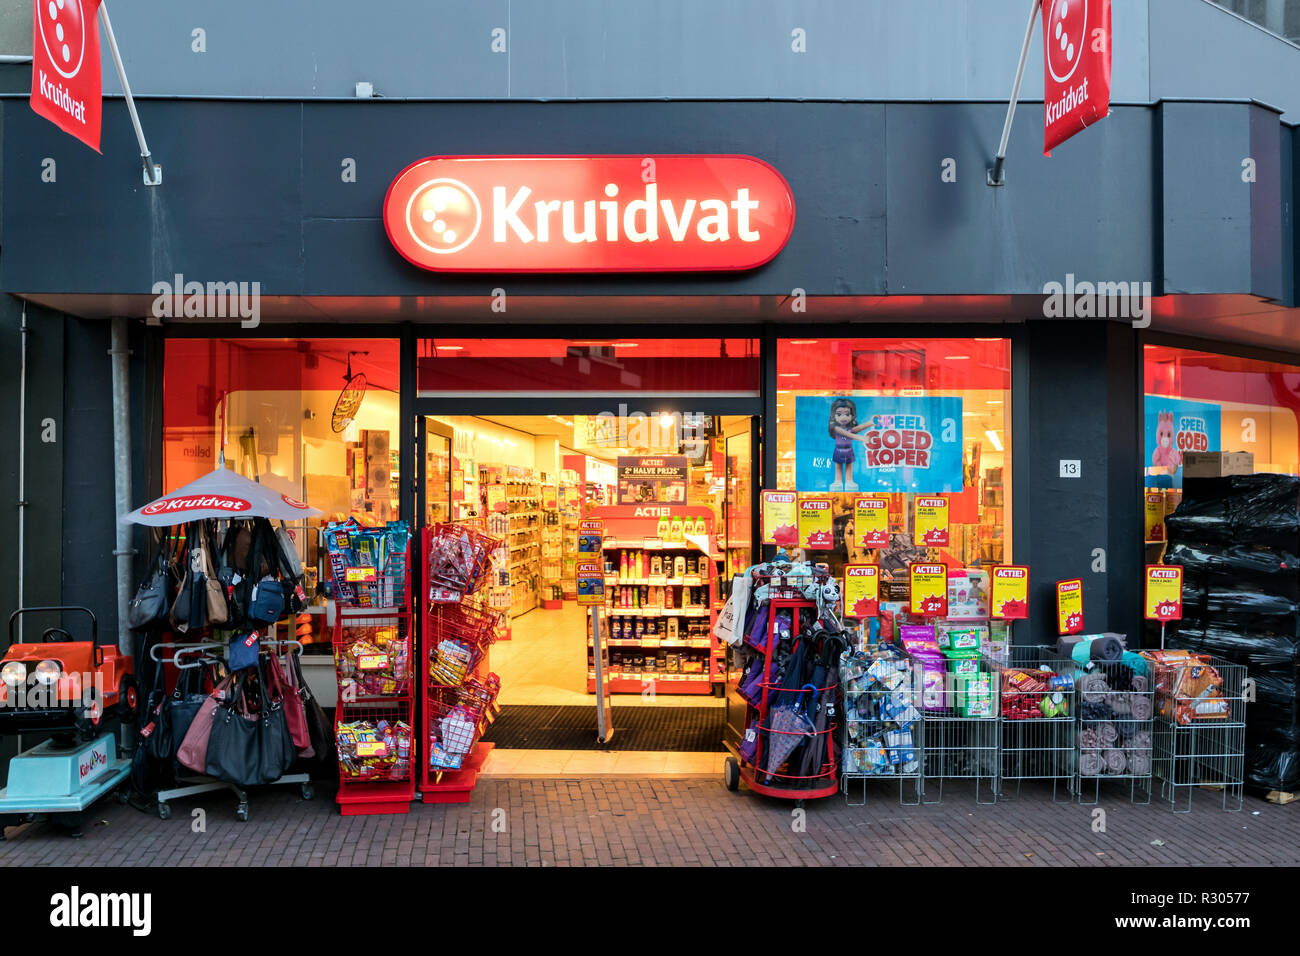 Kruidvat branch in Sneek, the Netherlands. Kruidvat is a Dutch retail, pharmacy and drugstore chain specialised in health and beauty products. Stock Photo